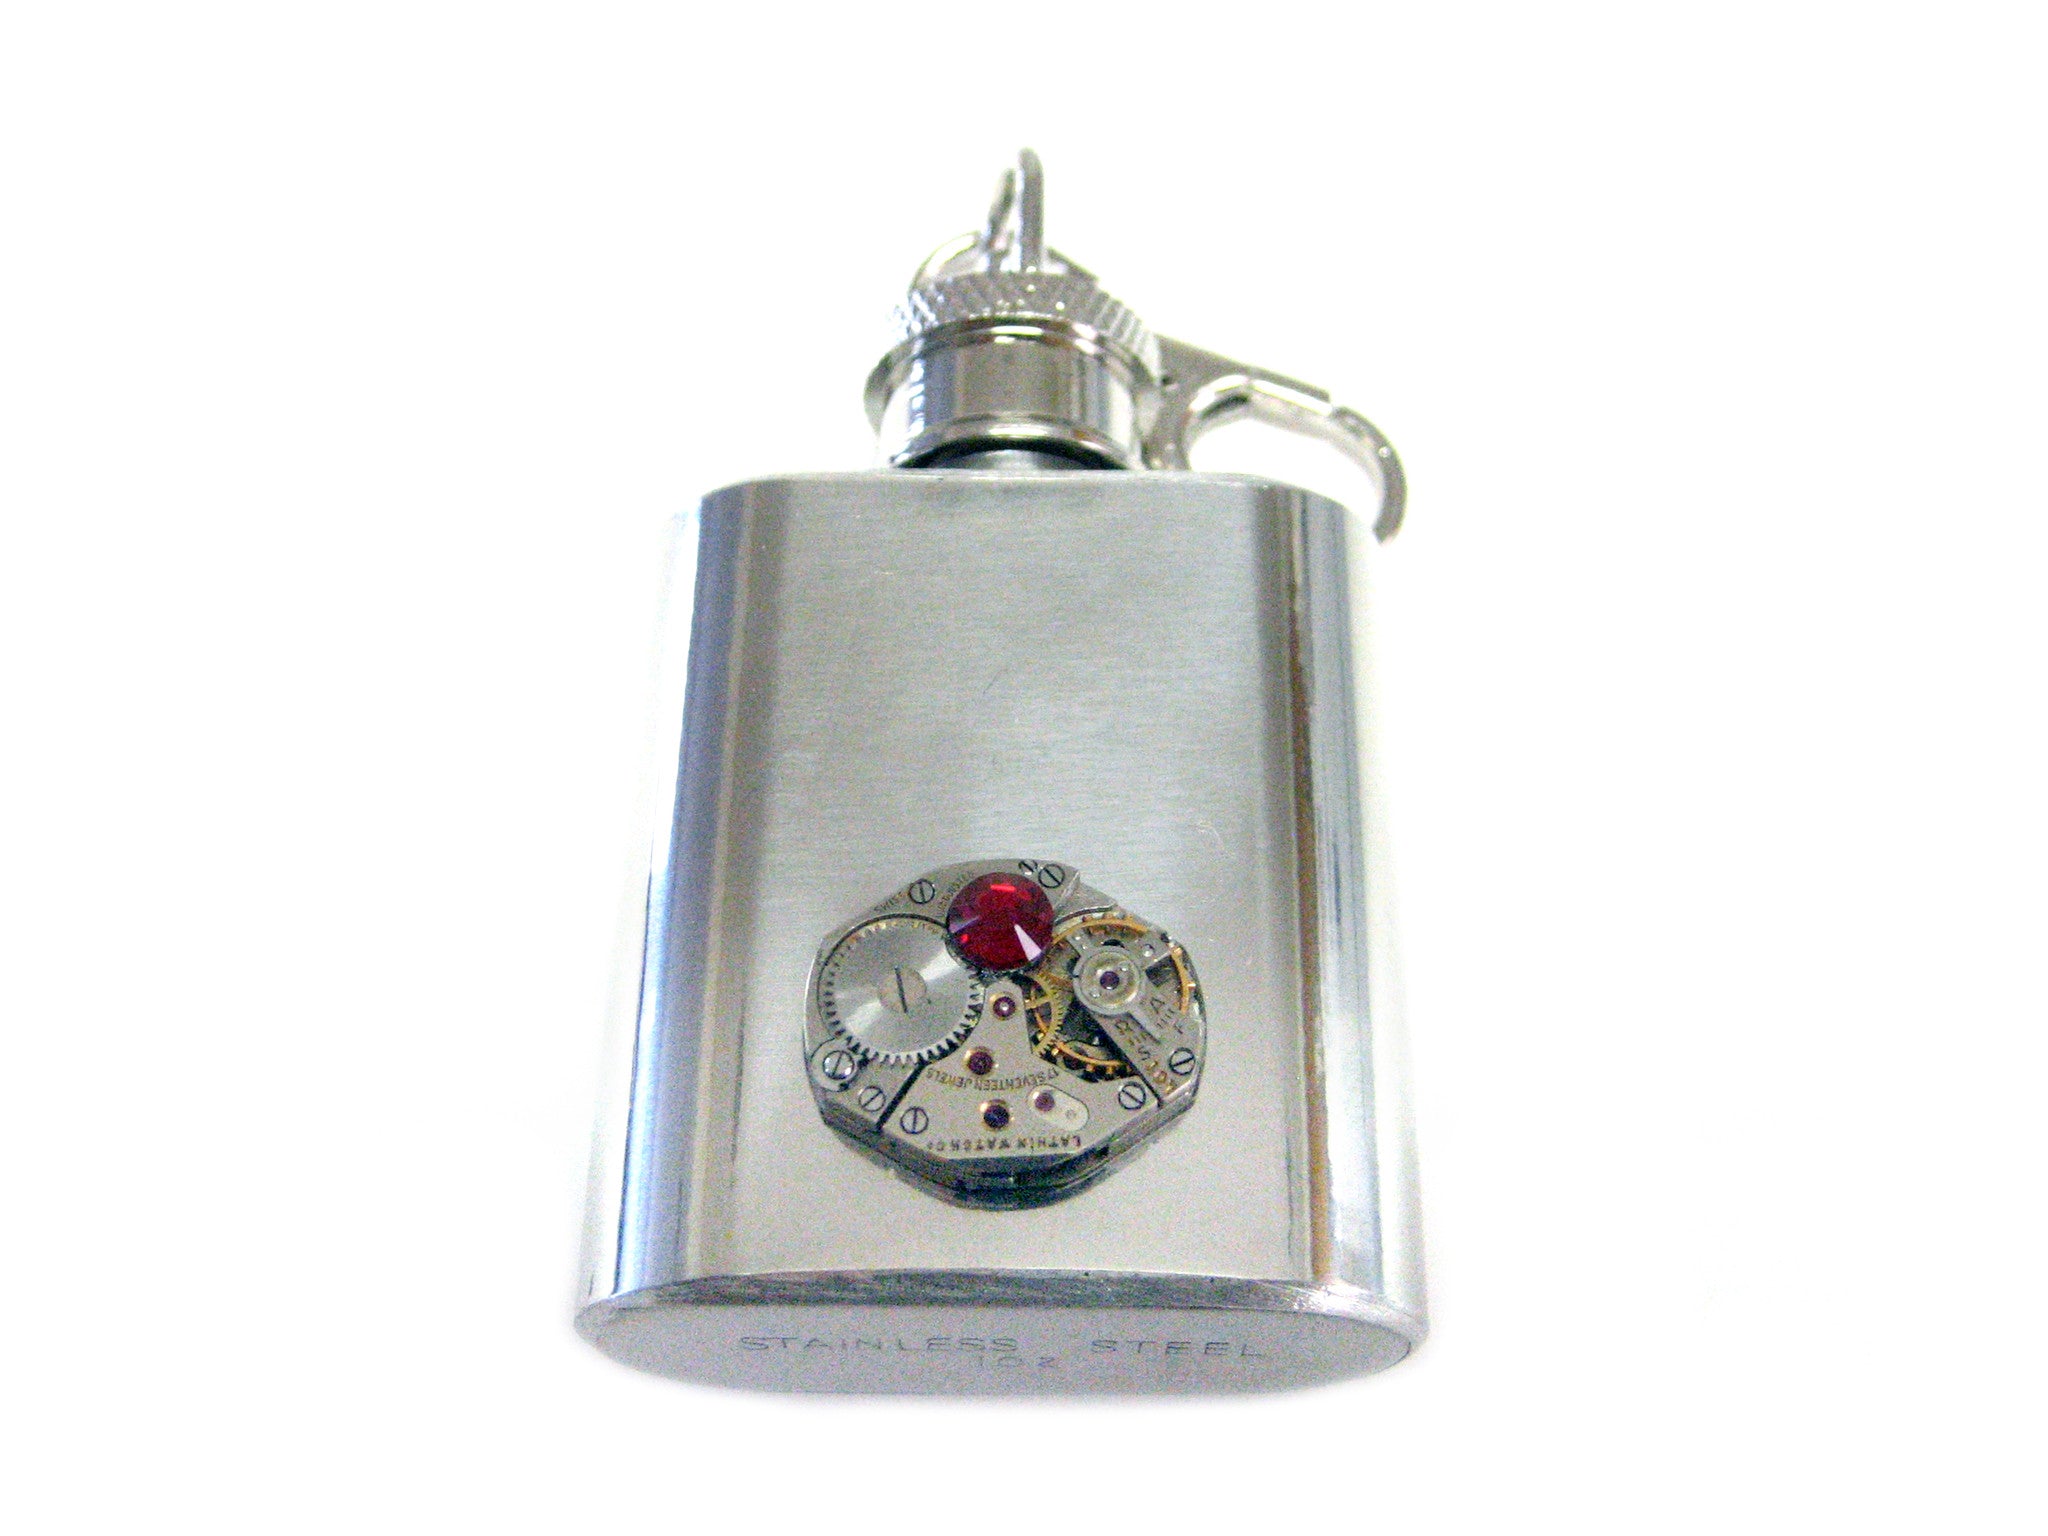 1 Oz. Stainless Steel Key Chain Flask with Steampunk Watch Gear Pendant and Red Swarovski Crystal